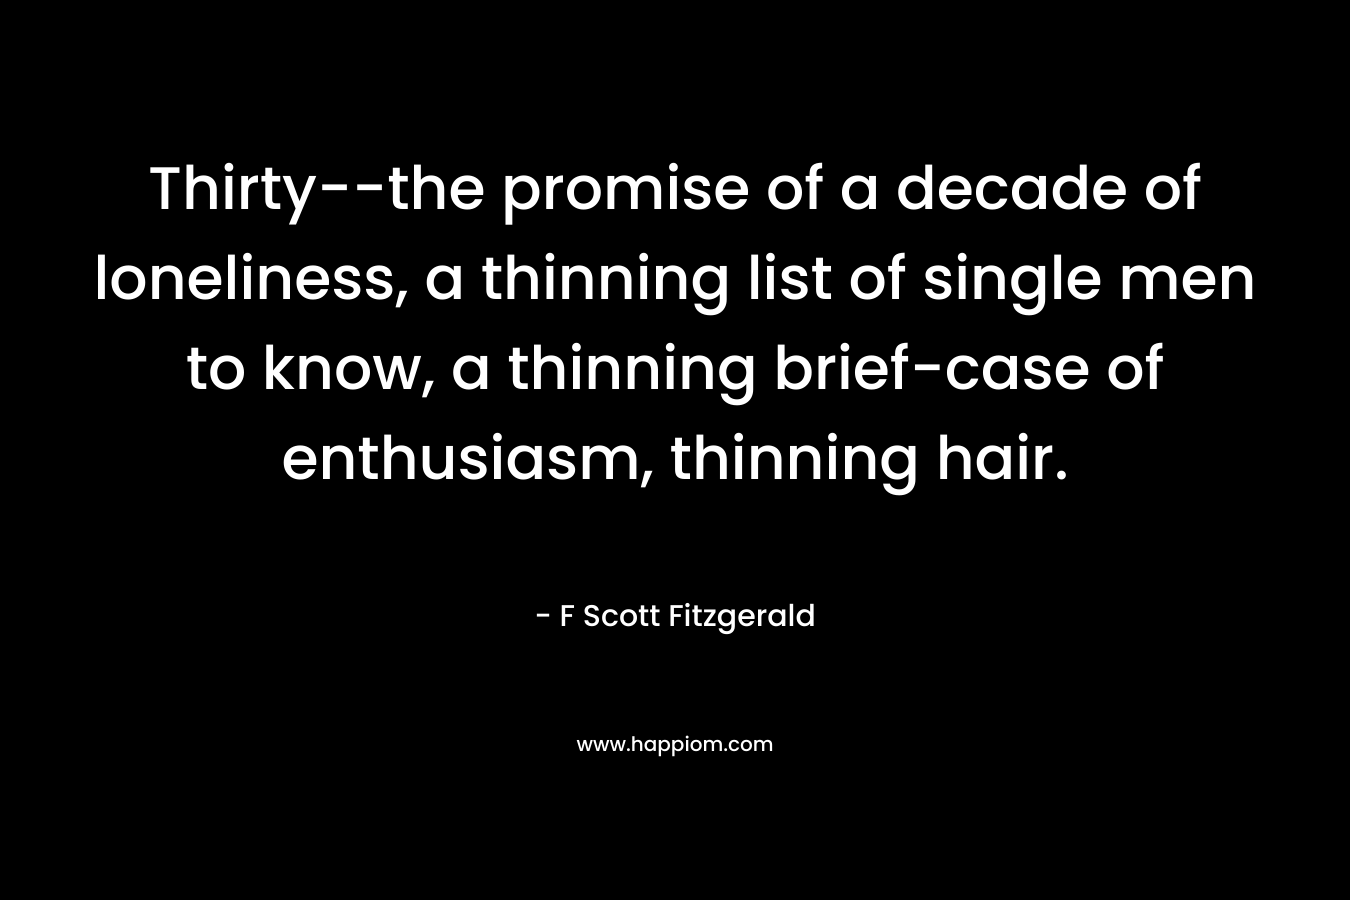 Thirty–the promise of a decade of loneliness, a thinning list of single men to know, a thinning brief-case of enthusiasm, thinning hair. – F Scott Fitzgerald